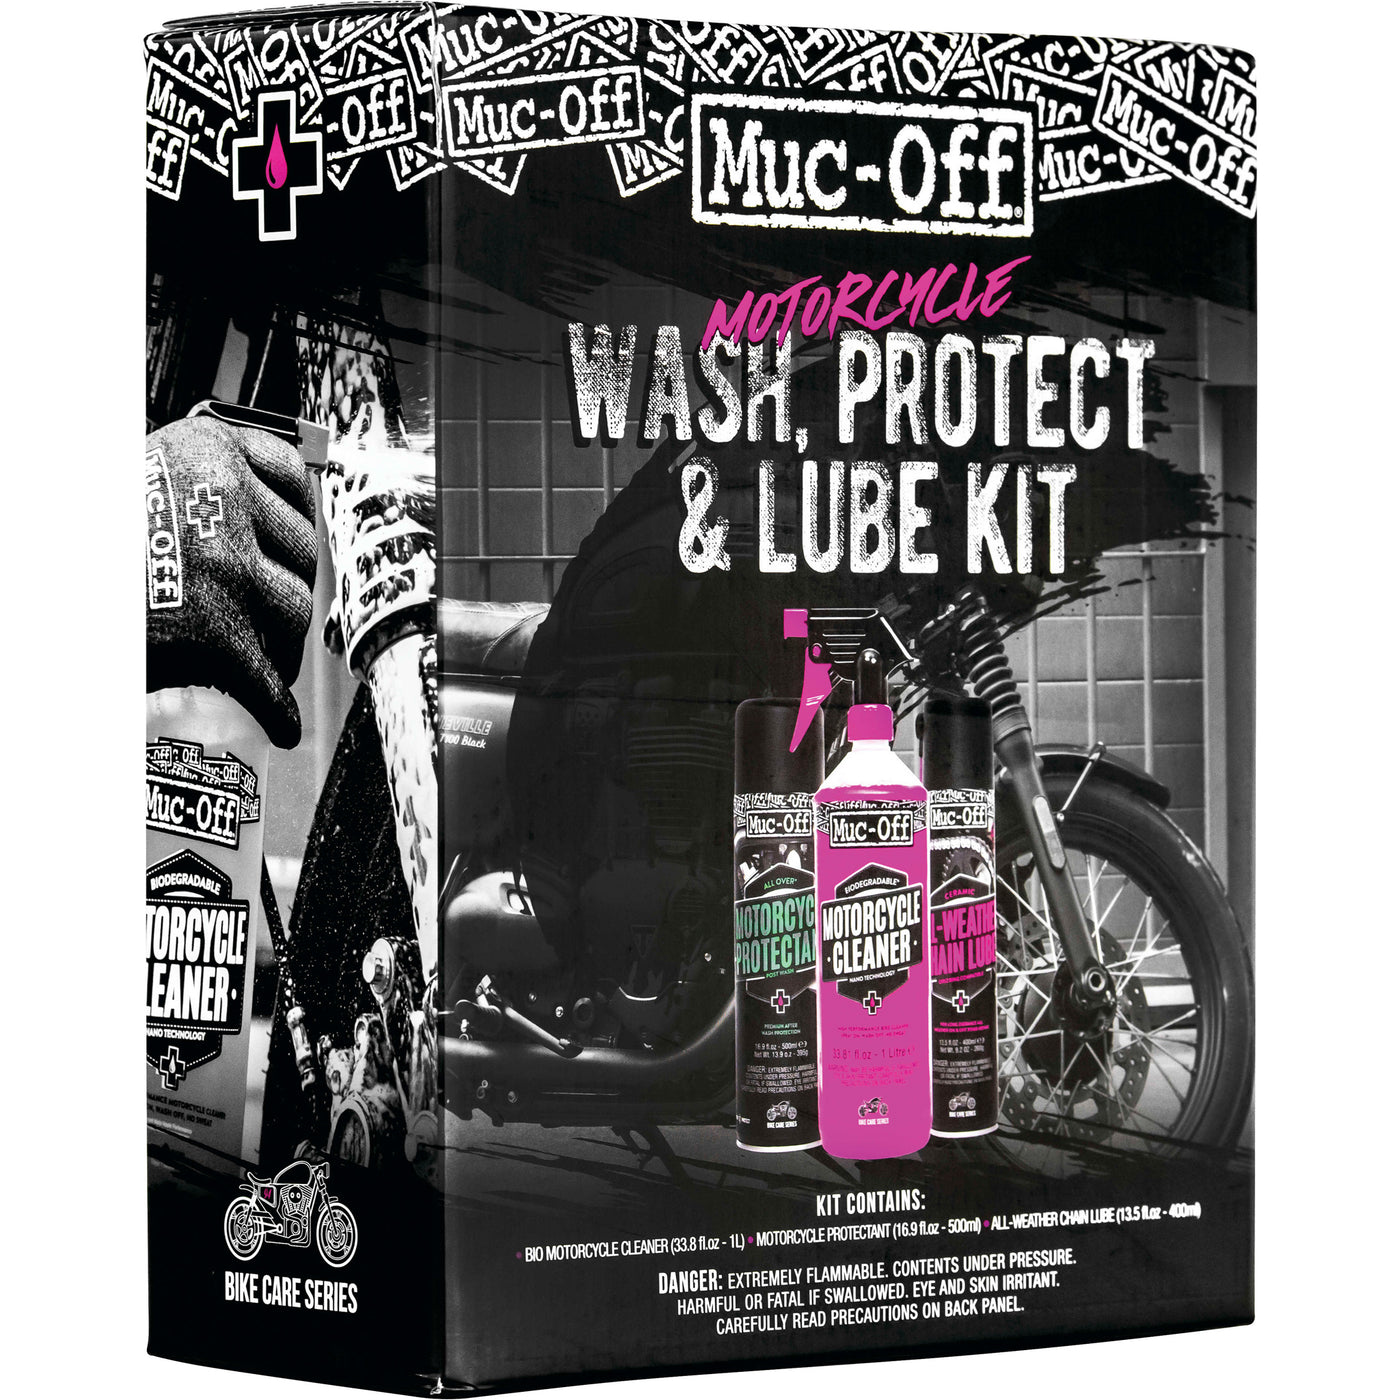 Muc-off Motorcycle Wash, Protect & Lube Kit